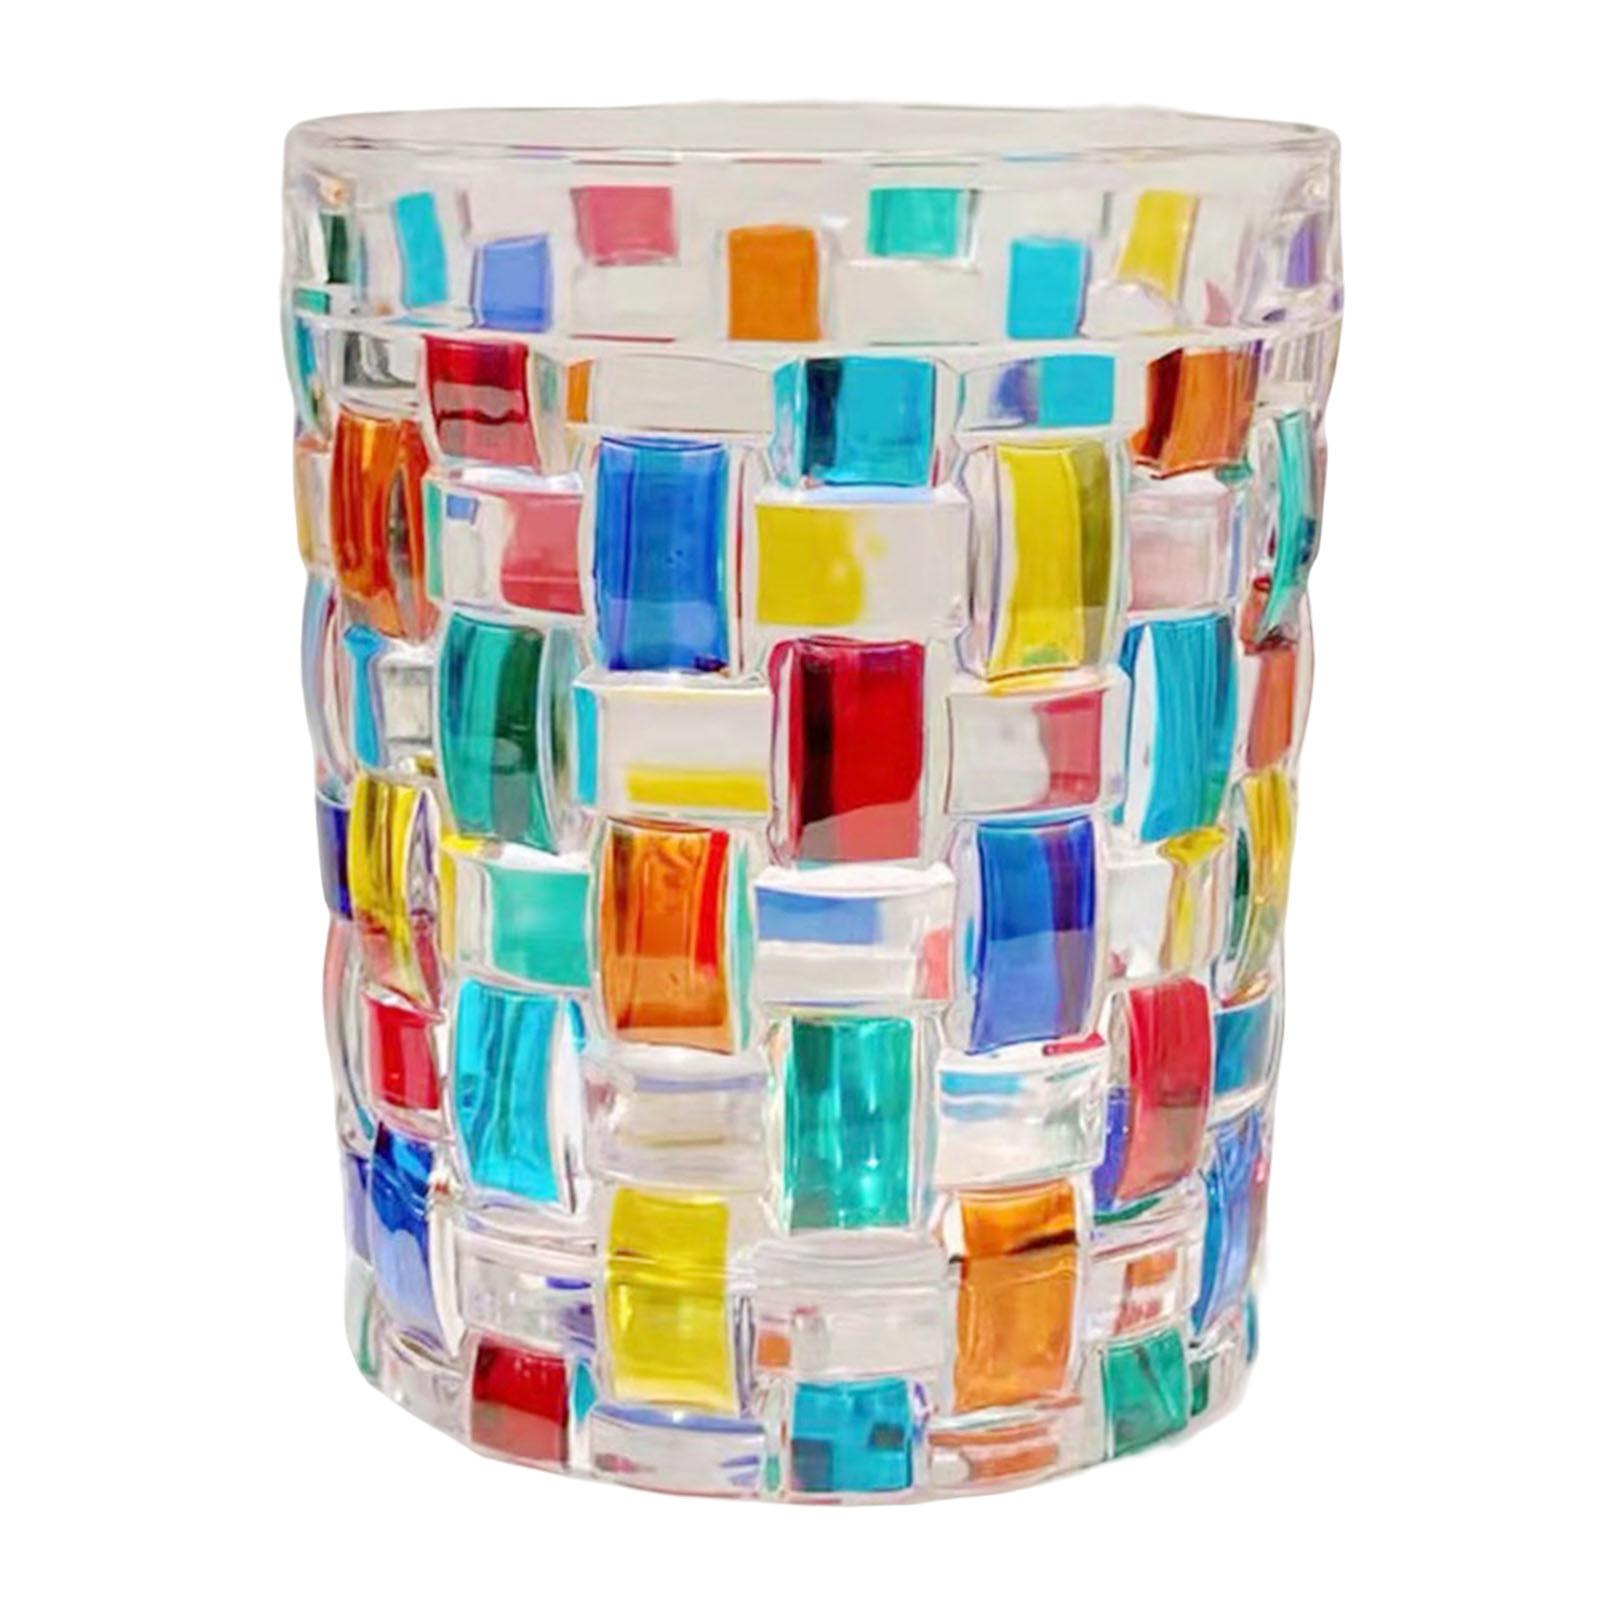 Glass Cup with Colorful Painting Glassware Teacup for Home Beverage Wine Gem Pattern